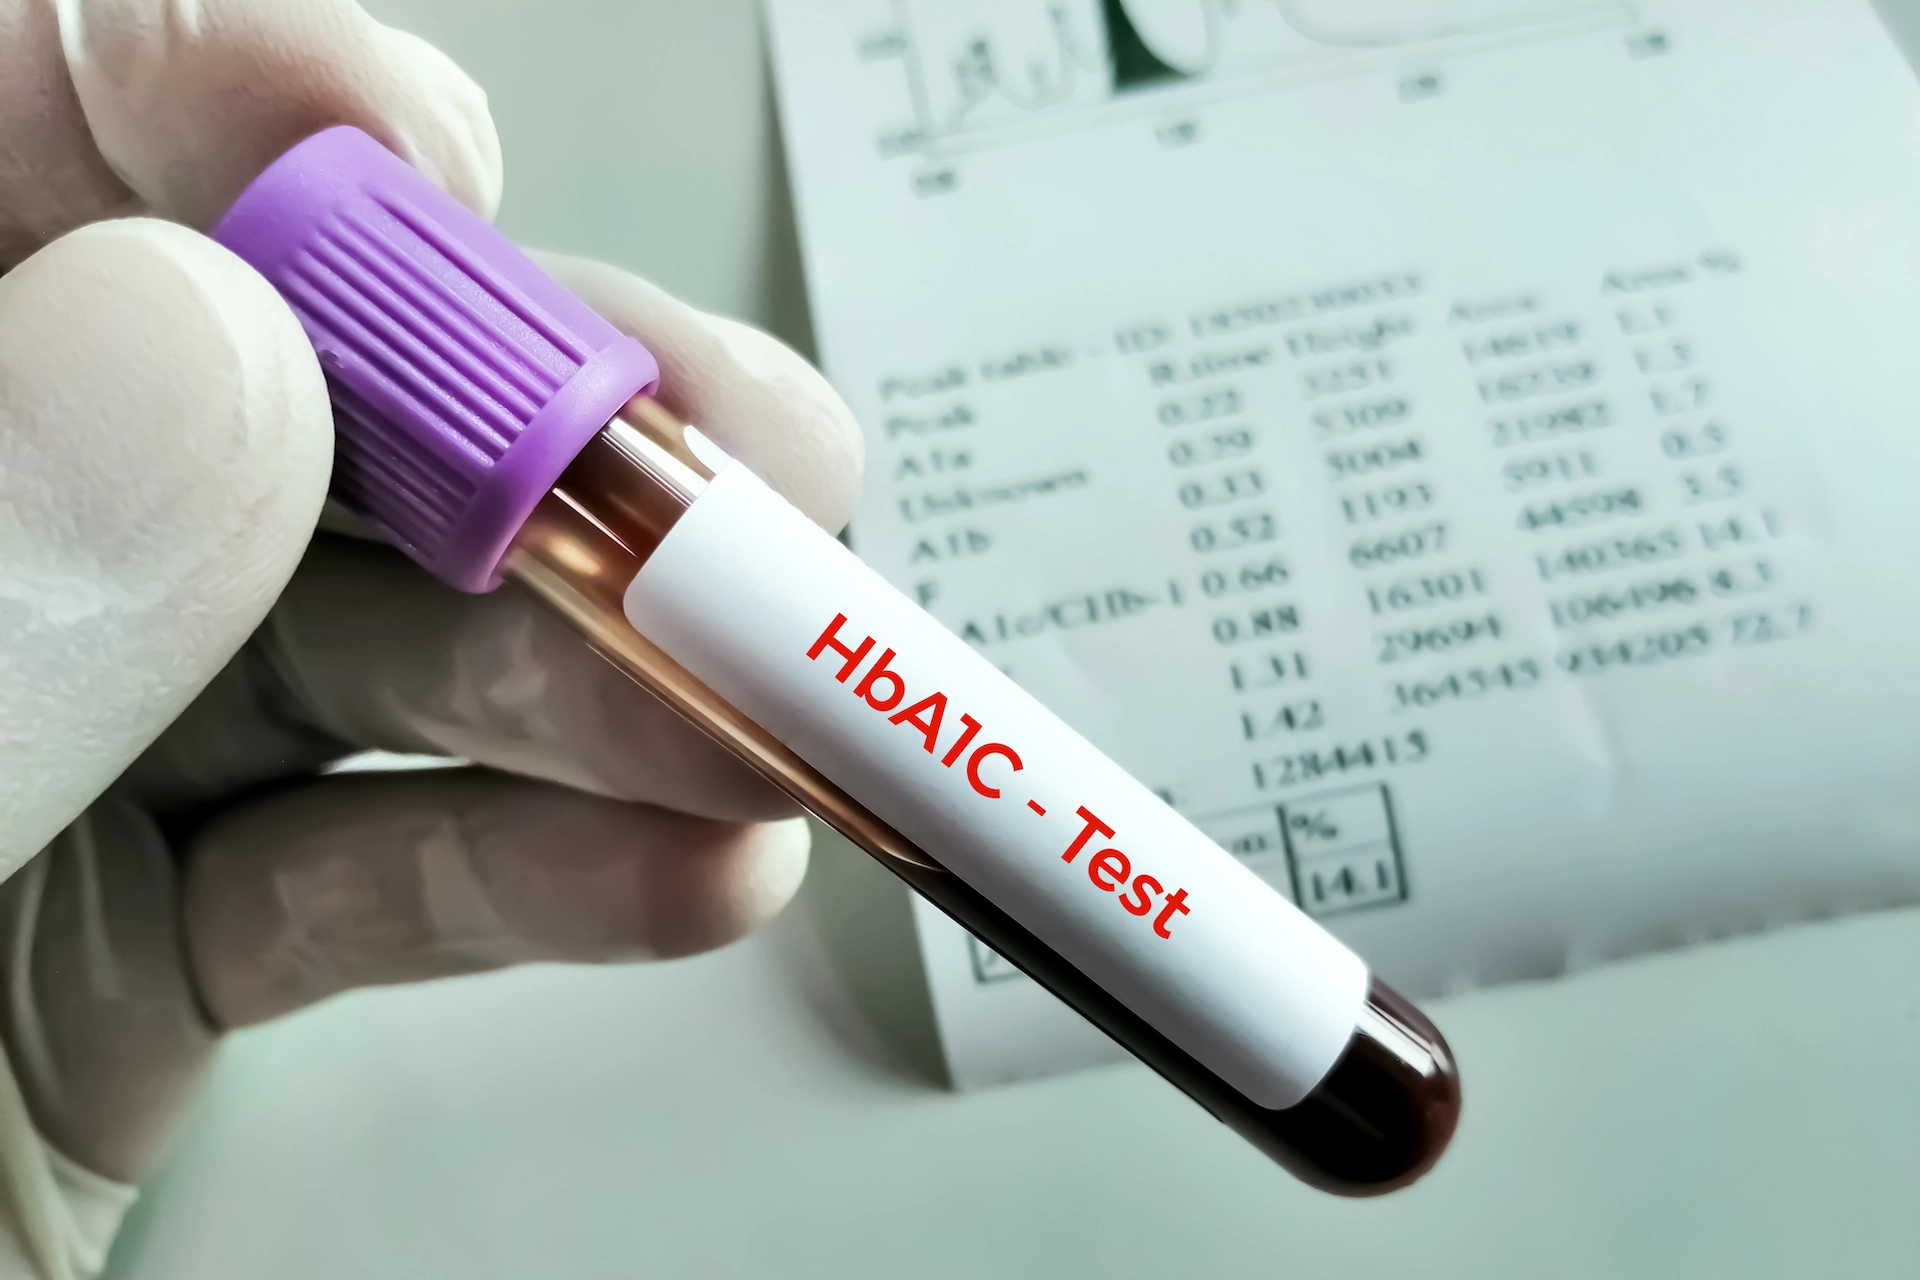 Blood test often incorrectly estimates blood sugar control in Black adults